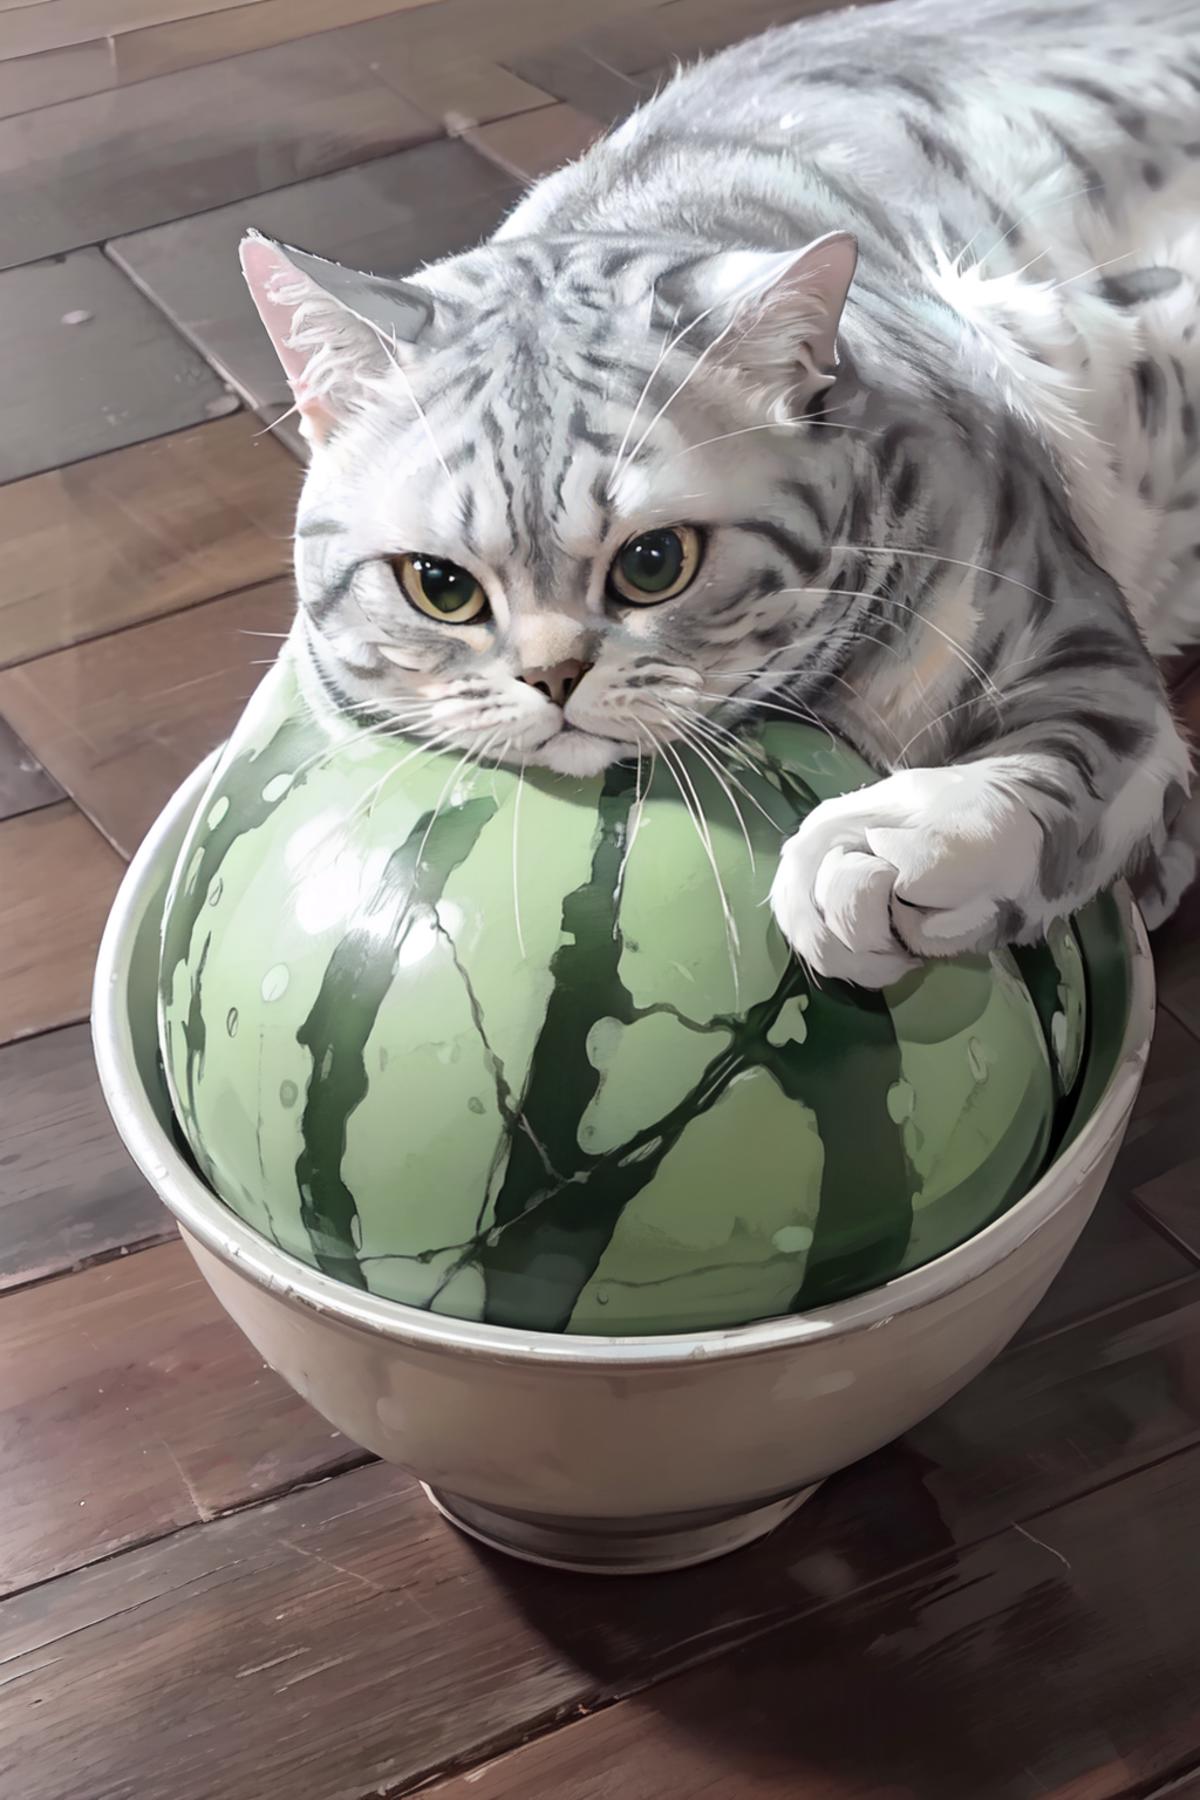 A cat with green eyes and a white coat is sitting in a bowl with a watermelon.